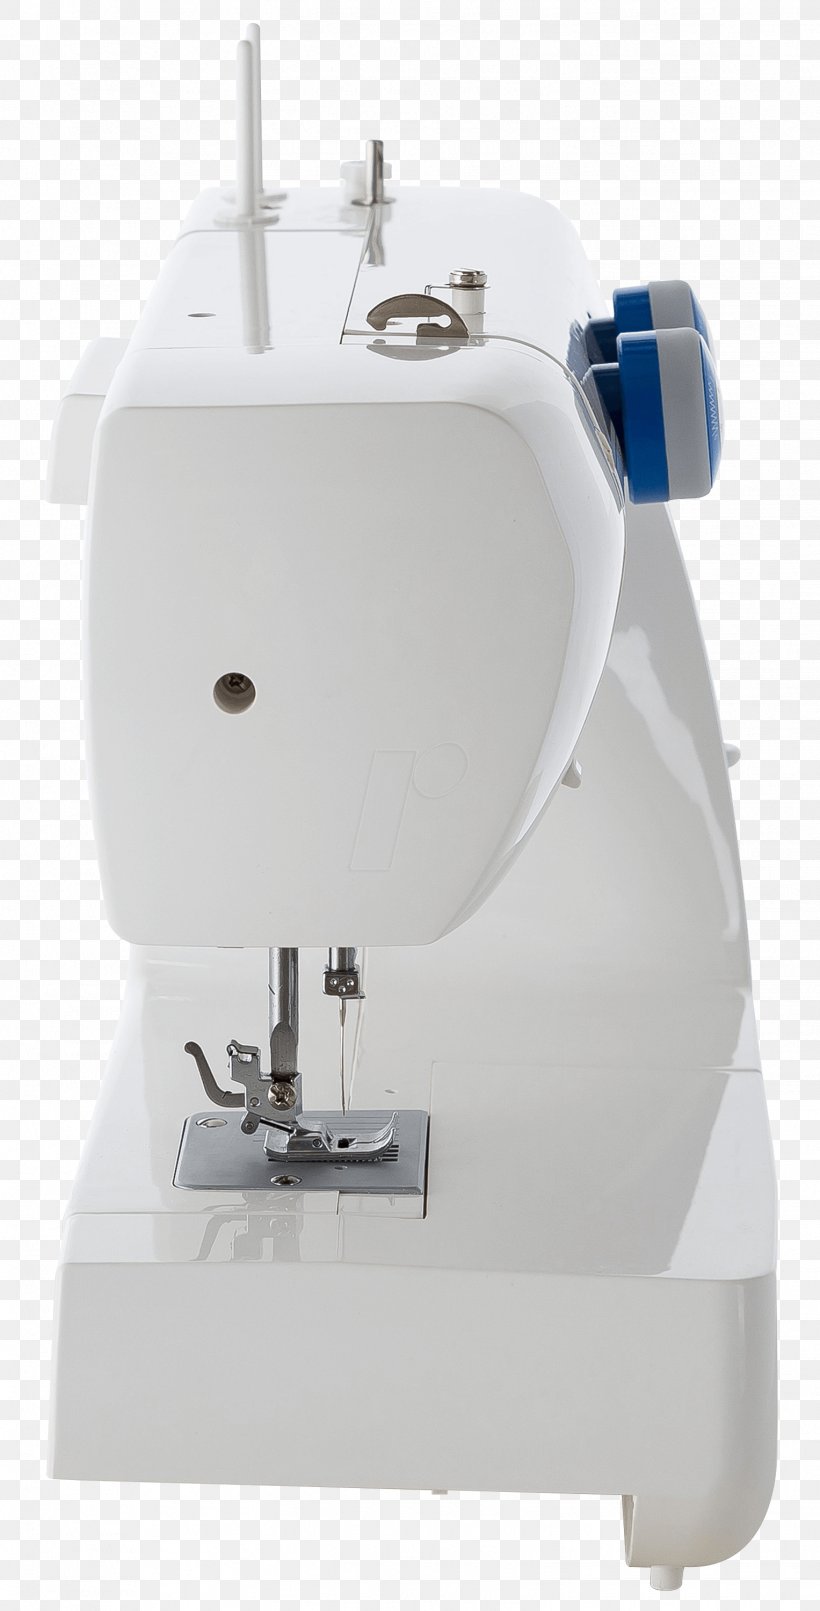 Sewing Machines Sewing Machine Needles Manufacturing, PNG, 1527x3000px, Sewing Machines, Blaupunkt, Clothing, Clothing Accessories, Clothing Industry Download Free